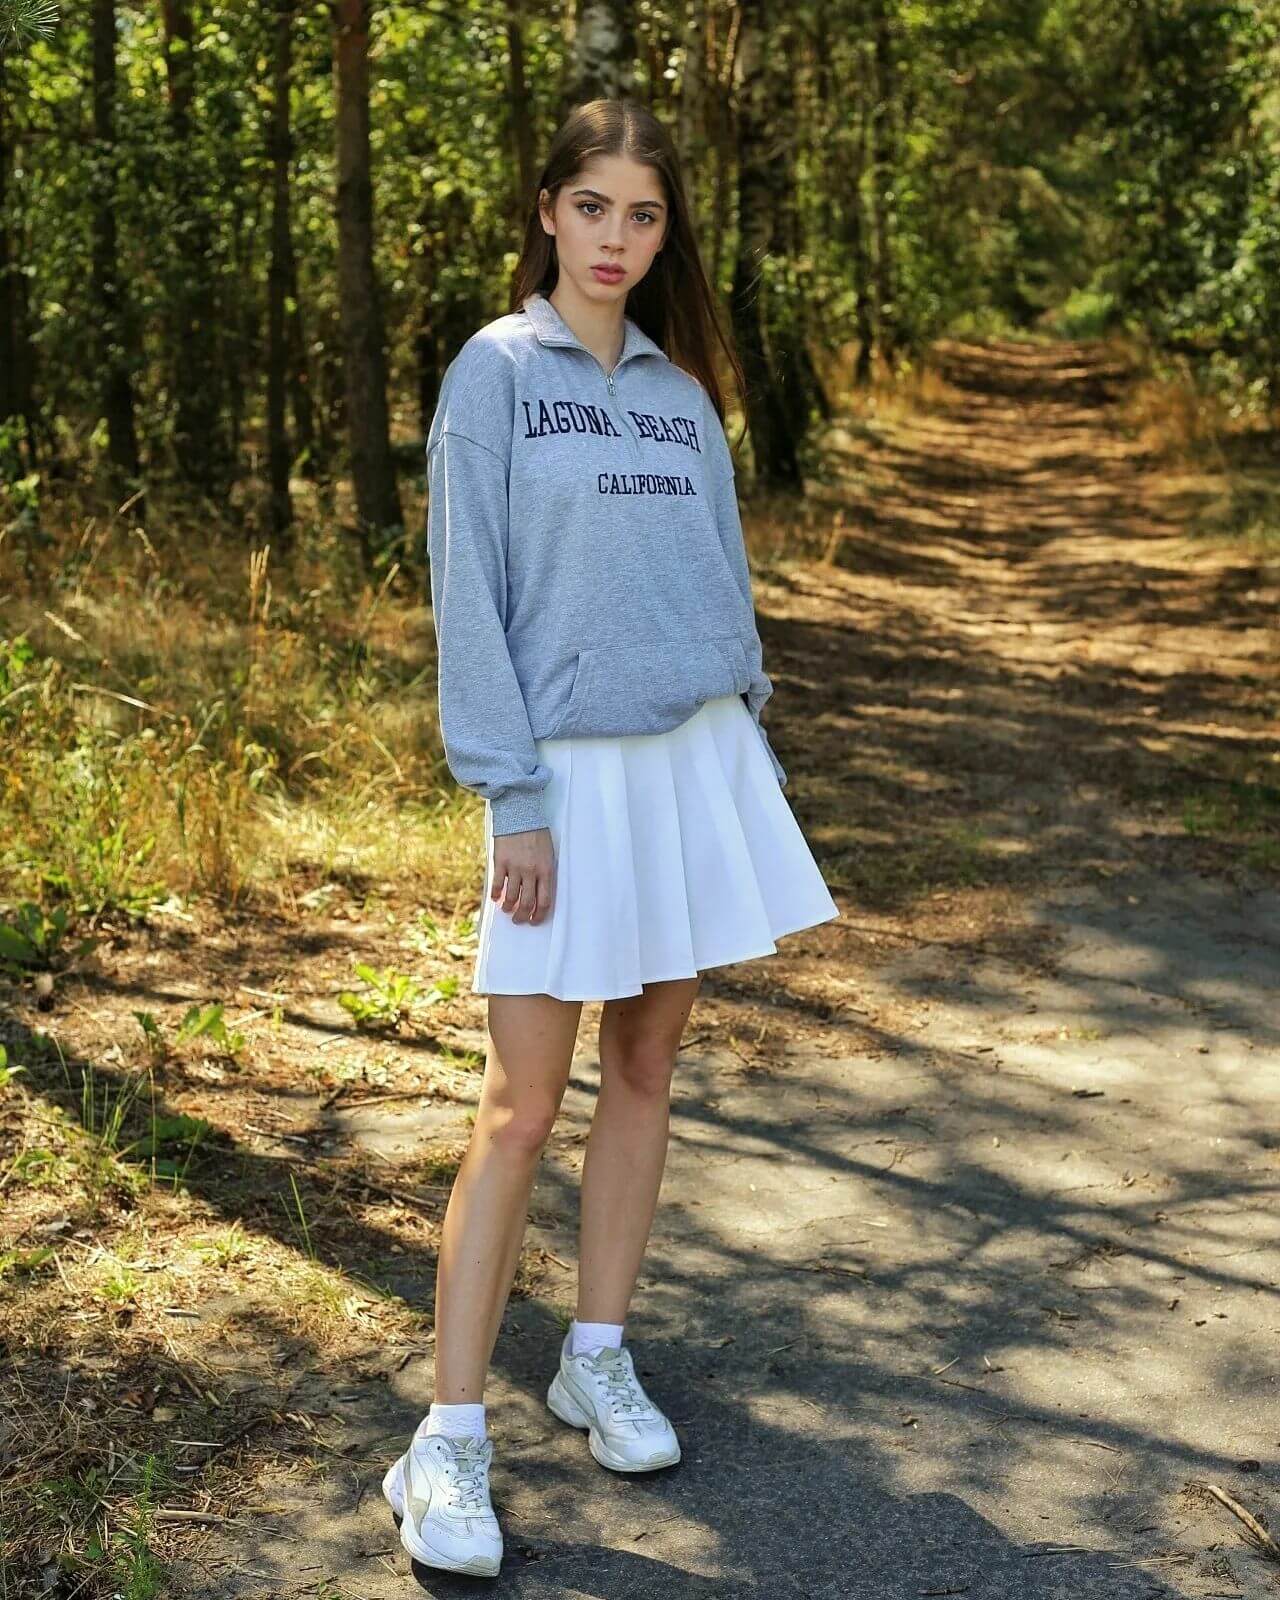 Agata Migdałek -In A White Skirt With Collar Sweatshirt Outfits